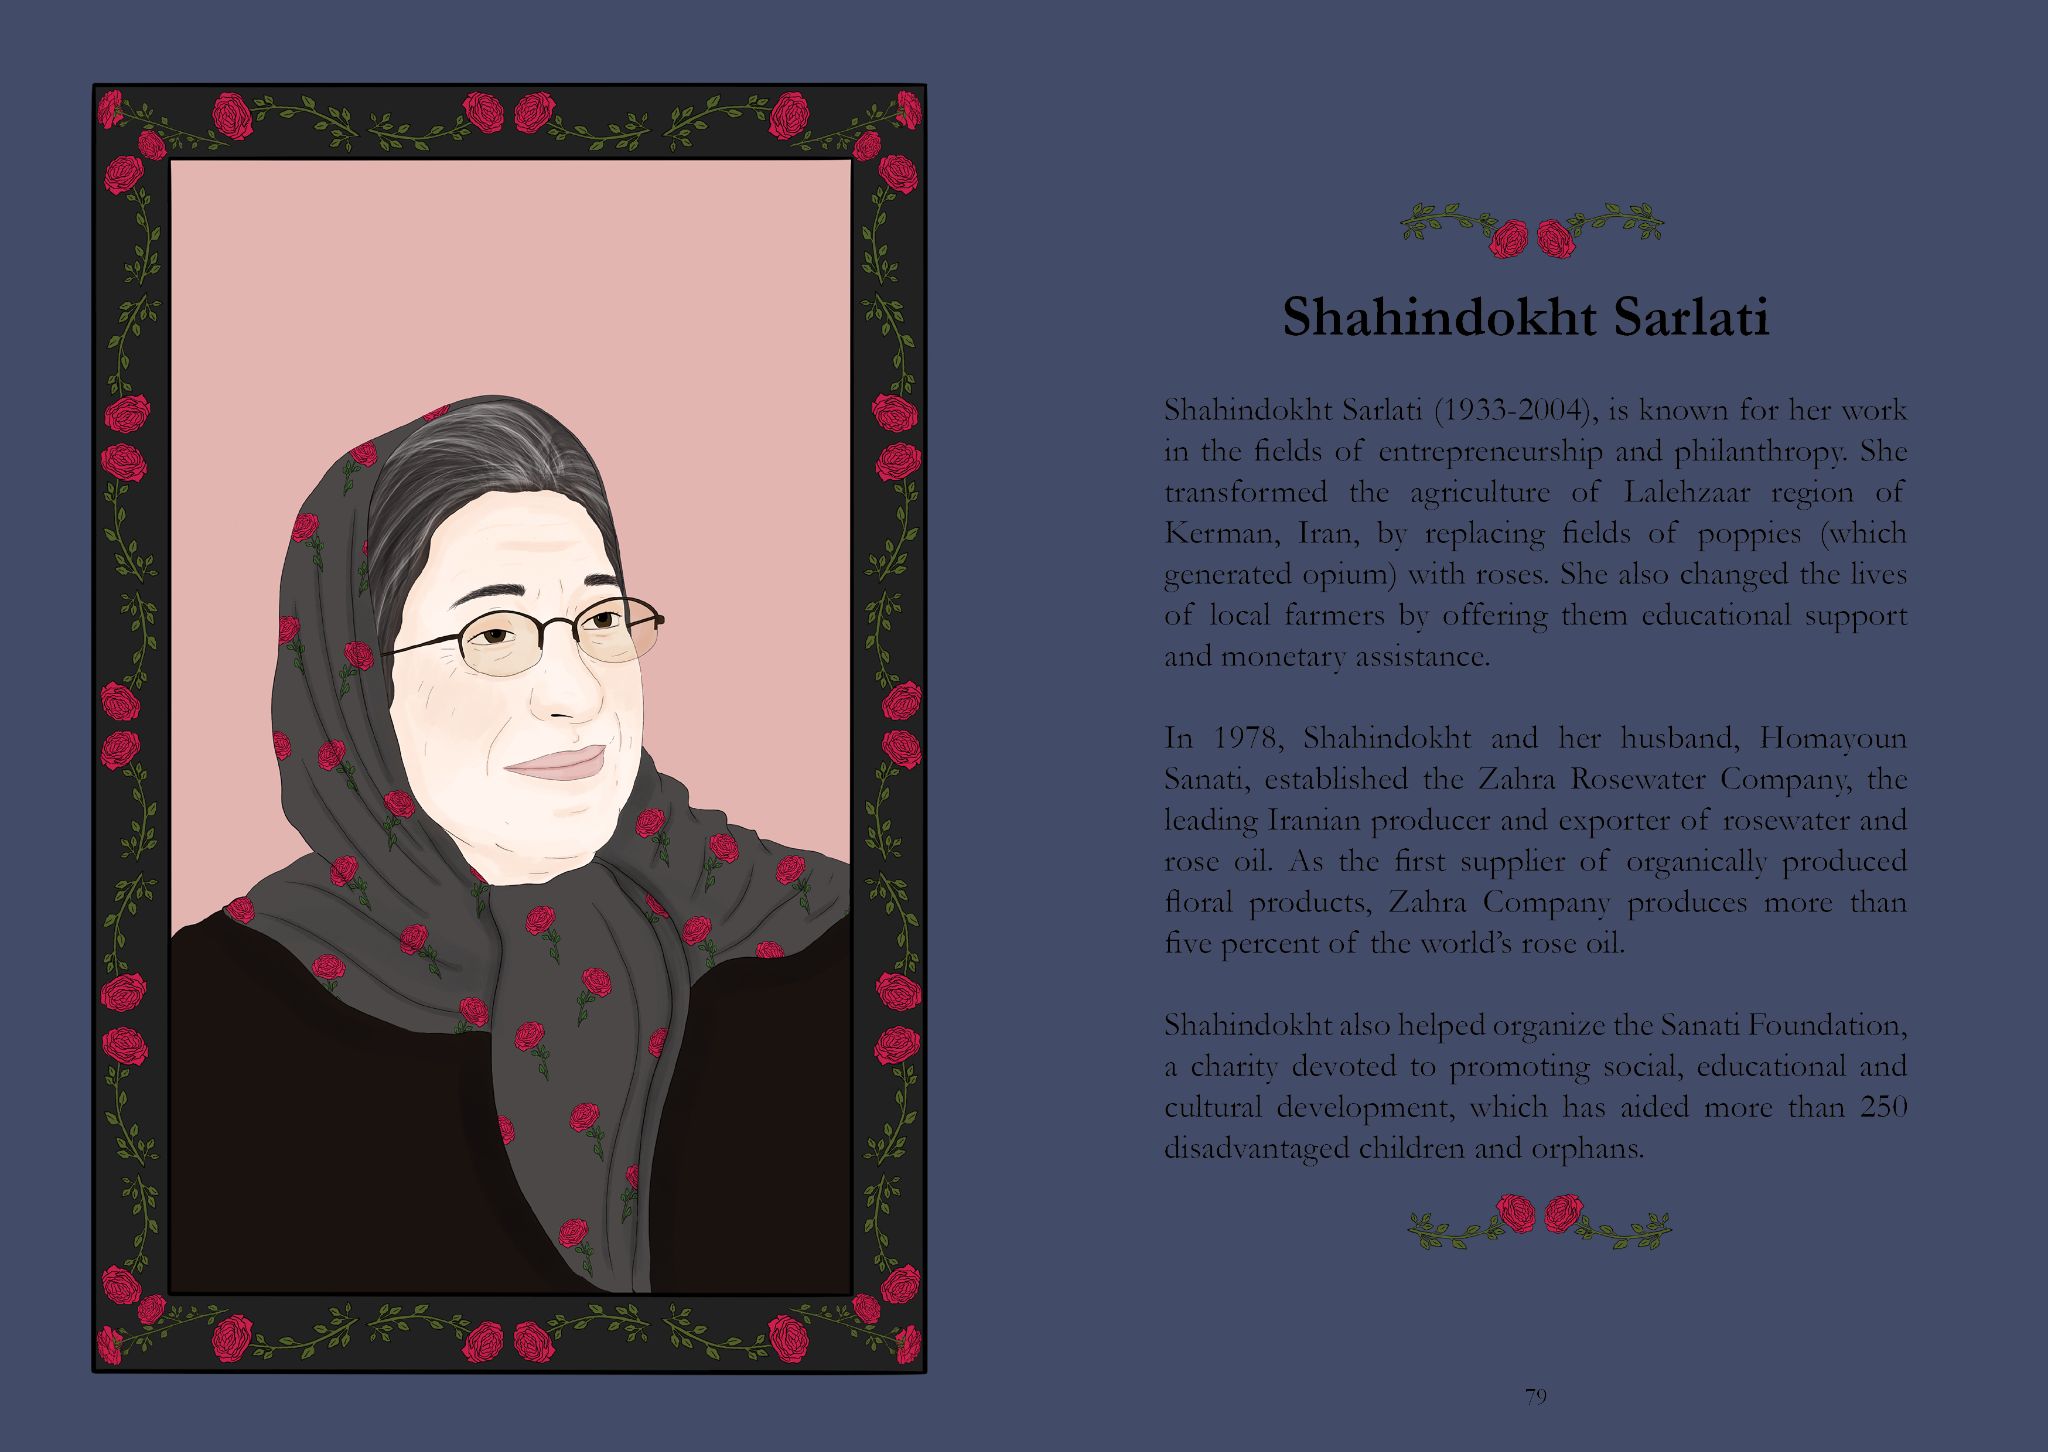 Shahindookht Sarlati helped fight the war on drugs by encouraging farmers to replace poppy fields with roses instead